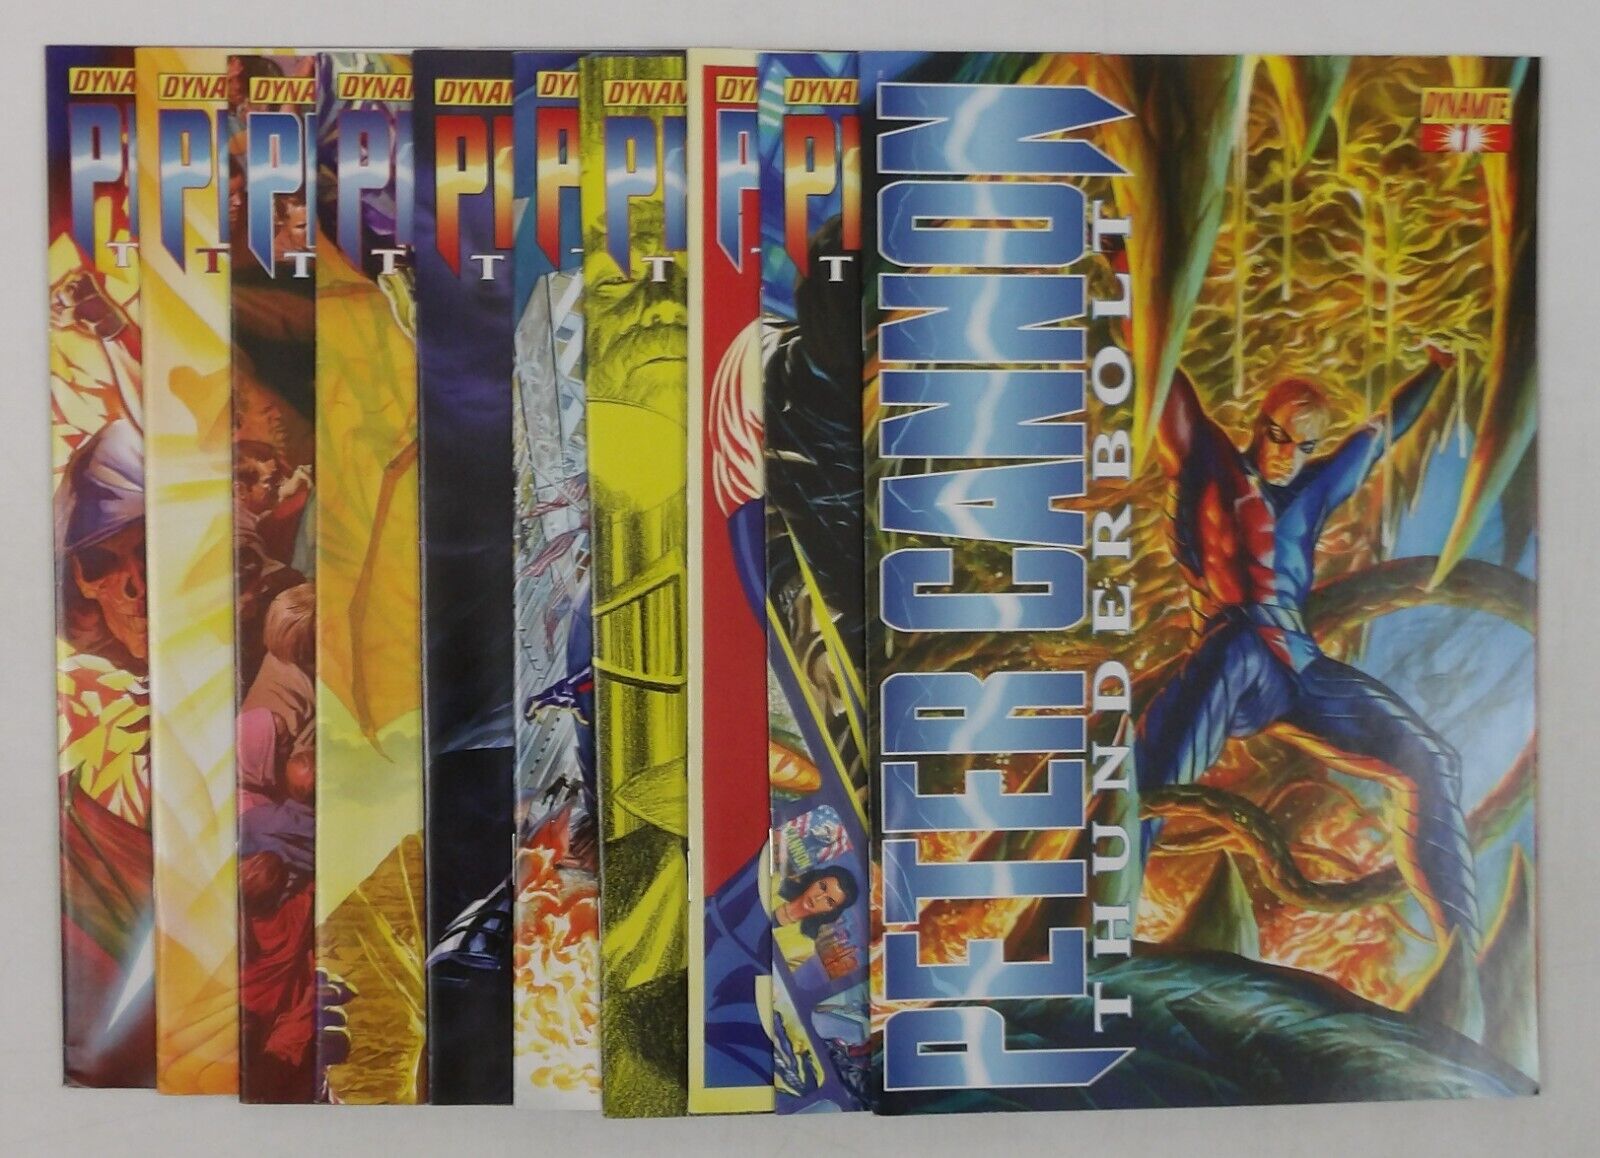 Peter Cannon Thunderbolt #1-10 VF/NM complete series - all Alex Ross variants